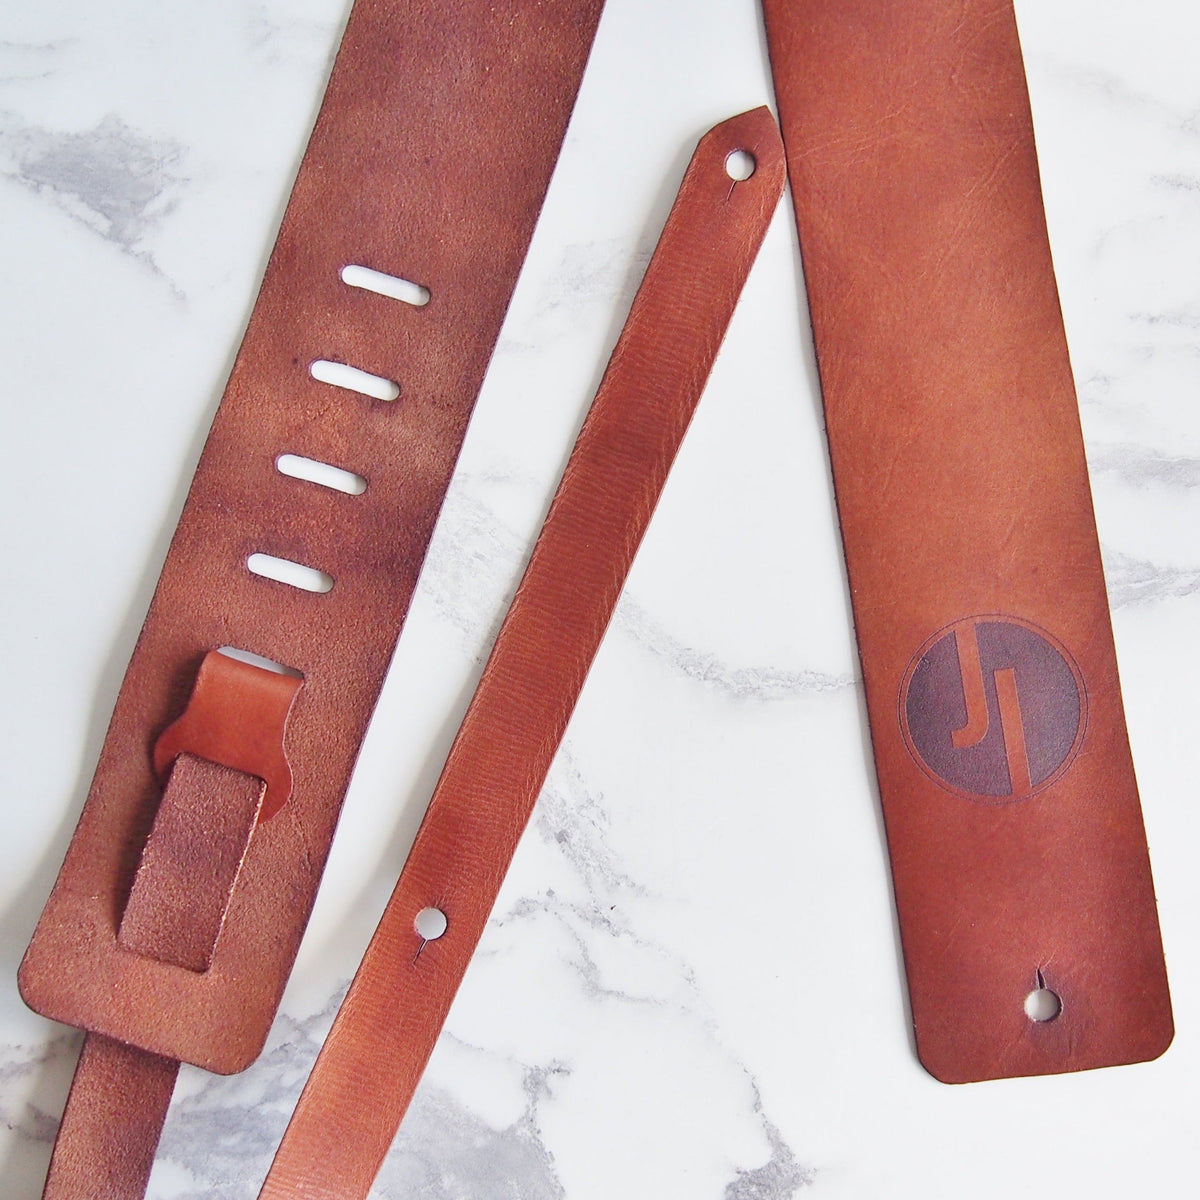 Custom Leather Guitar Straps, OCHRE handcrafted